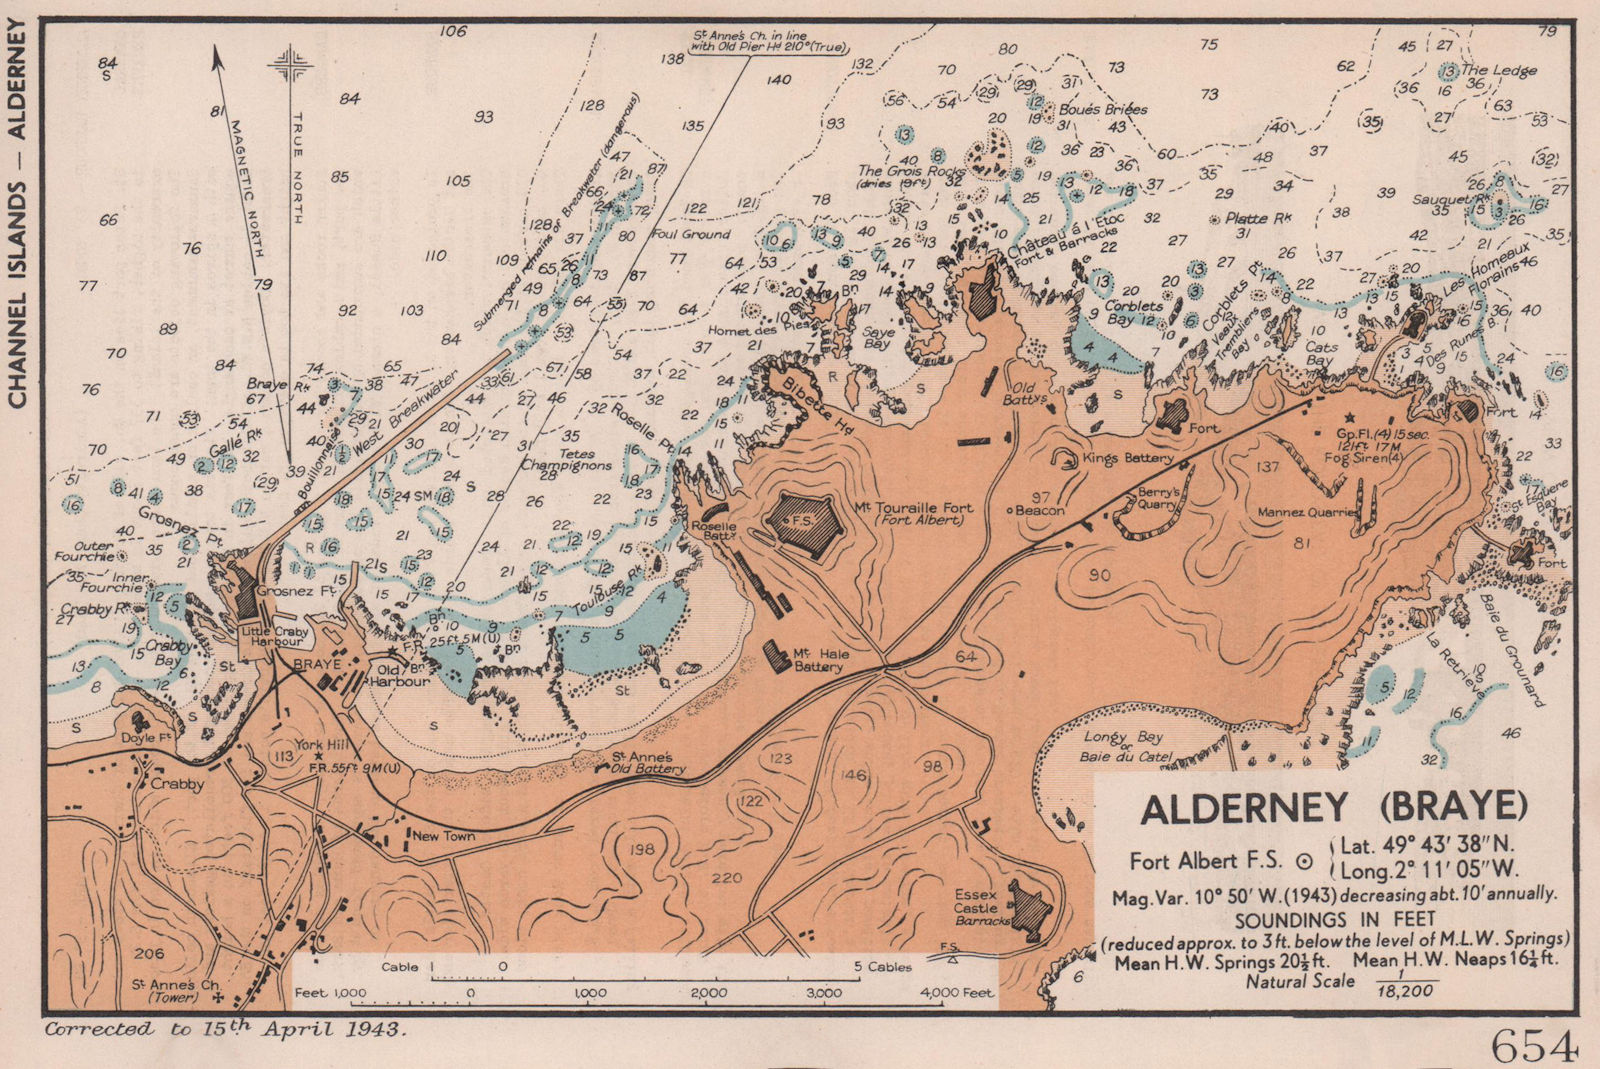 Associate Product Braye, Alderney sea coast chart D-Day planning map. ADMIRALTY 1943 old